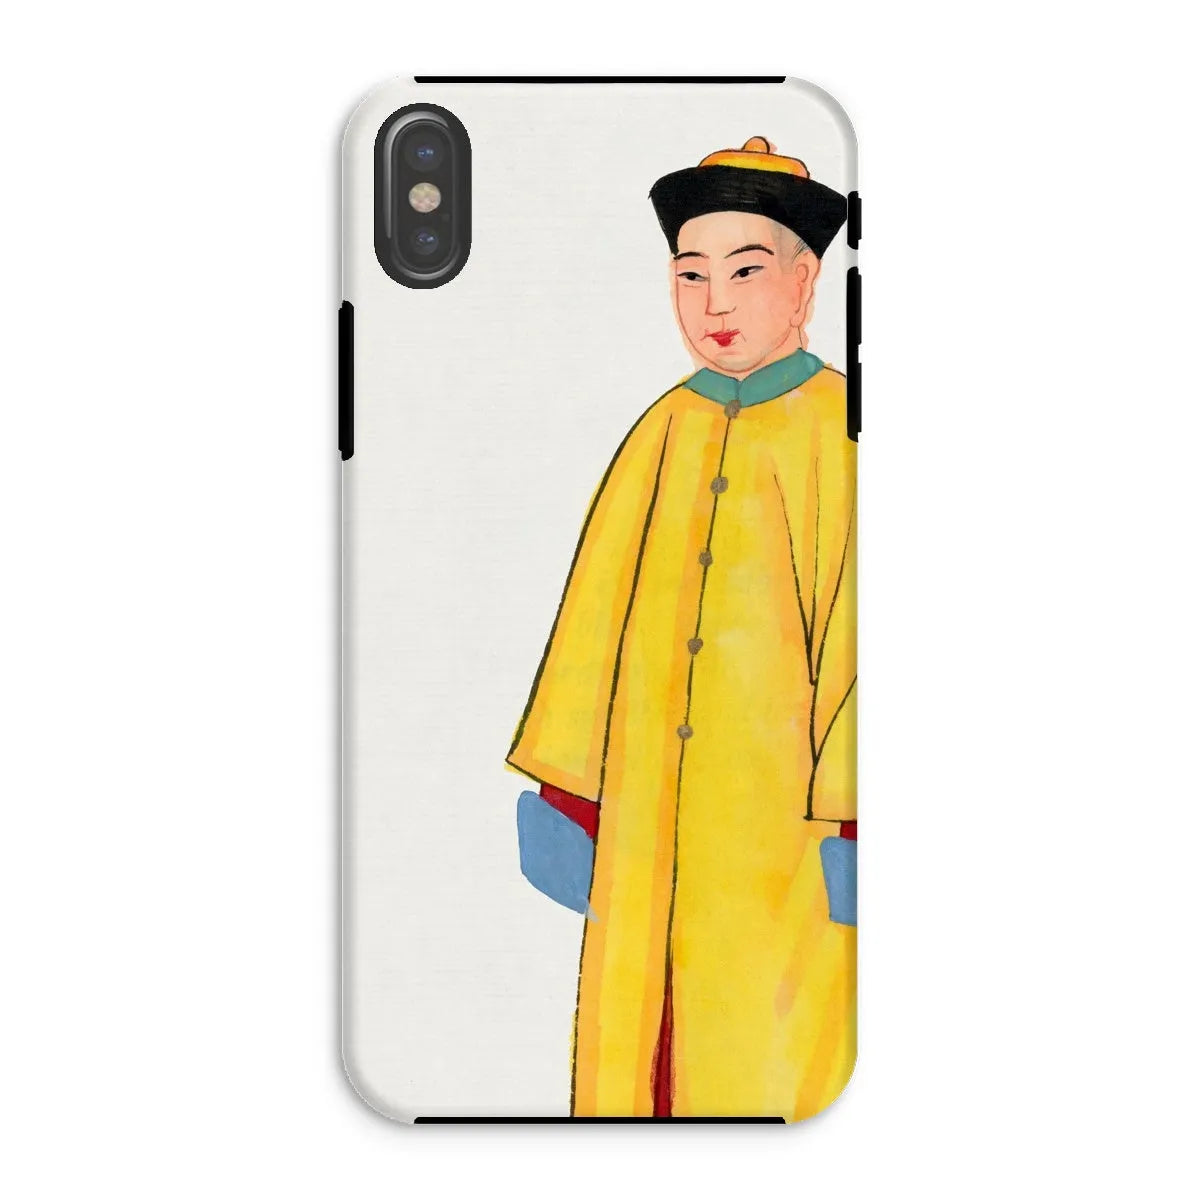 Priest In Yellow Robes - Chinese Aesthetic Art Phone Case - Iphone Xs / Matte - Mobile Phone Cases - Aesthetic Art